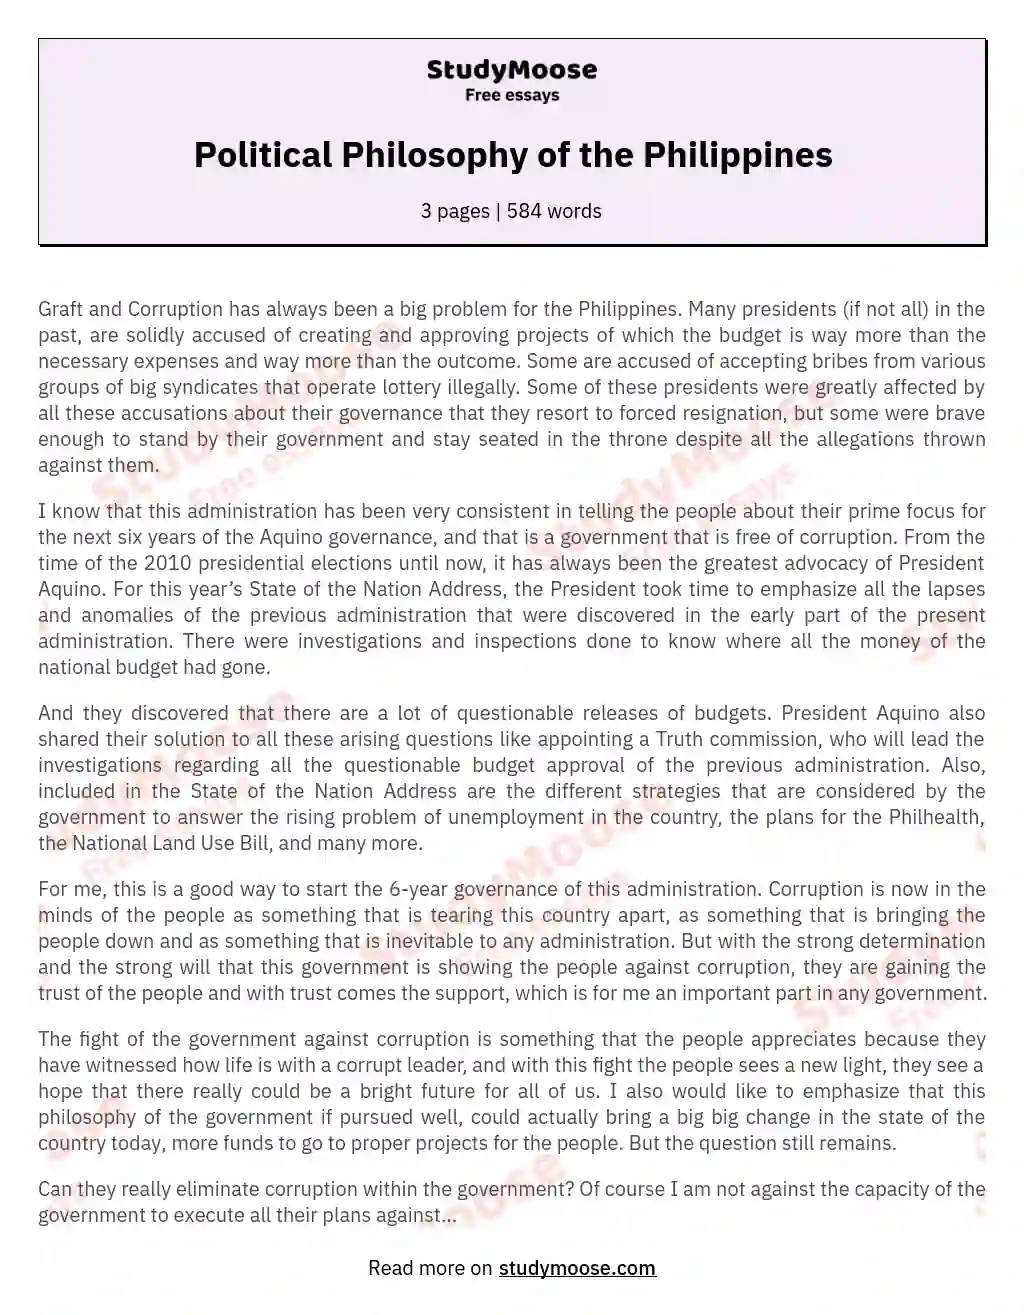 Political Philosophy of the Philippines essay